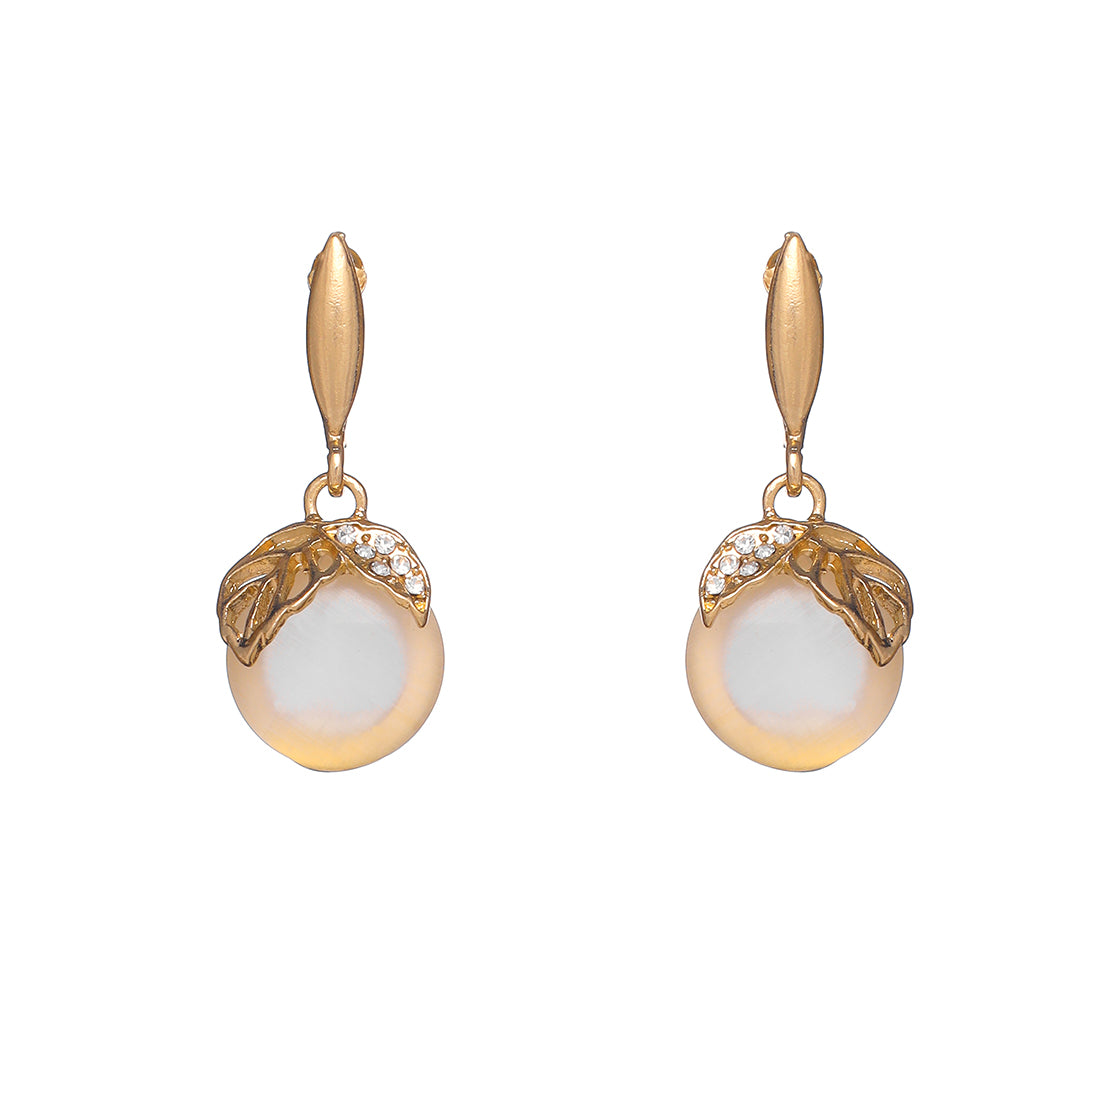 Elegant Leaf Pattern Gold-Toned Earrings With Moonstone And Diamonti Drops